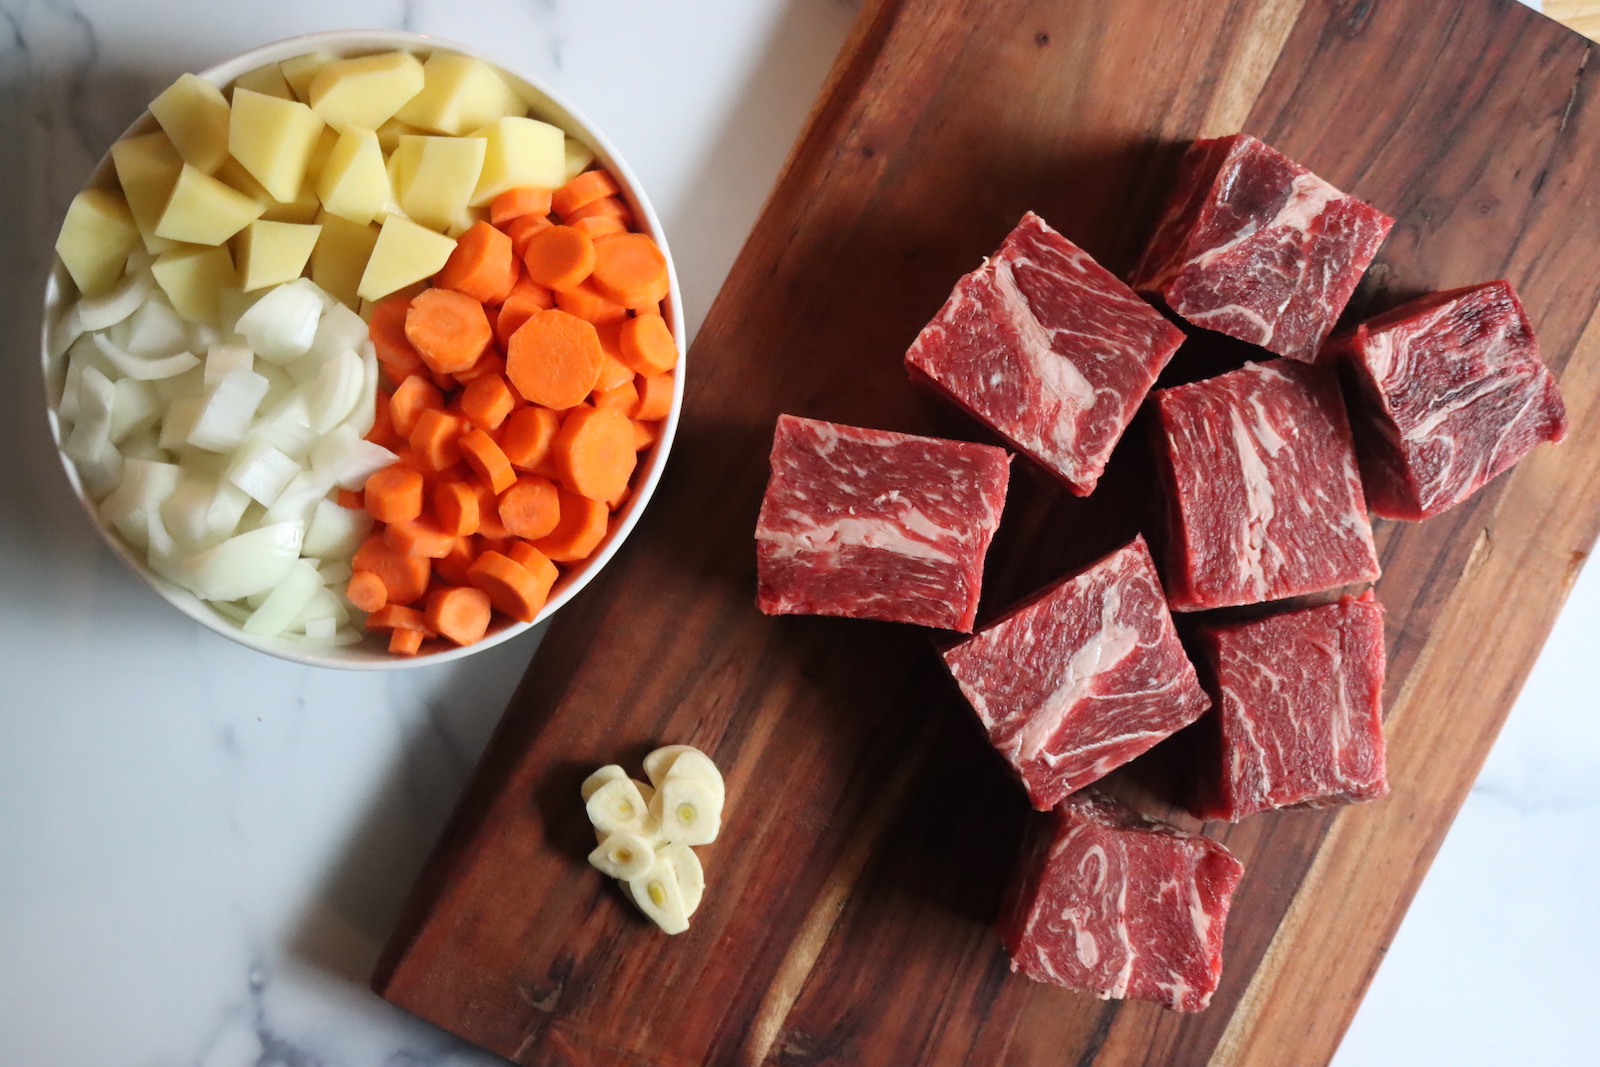 Ingredients for Canning Pot Roast in a Jar